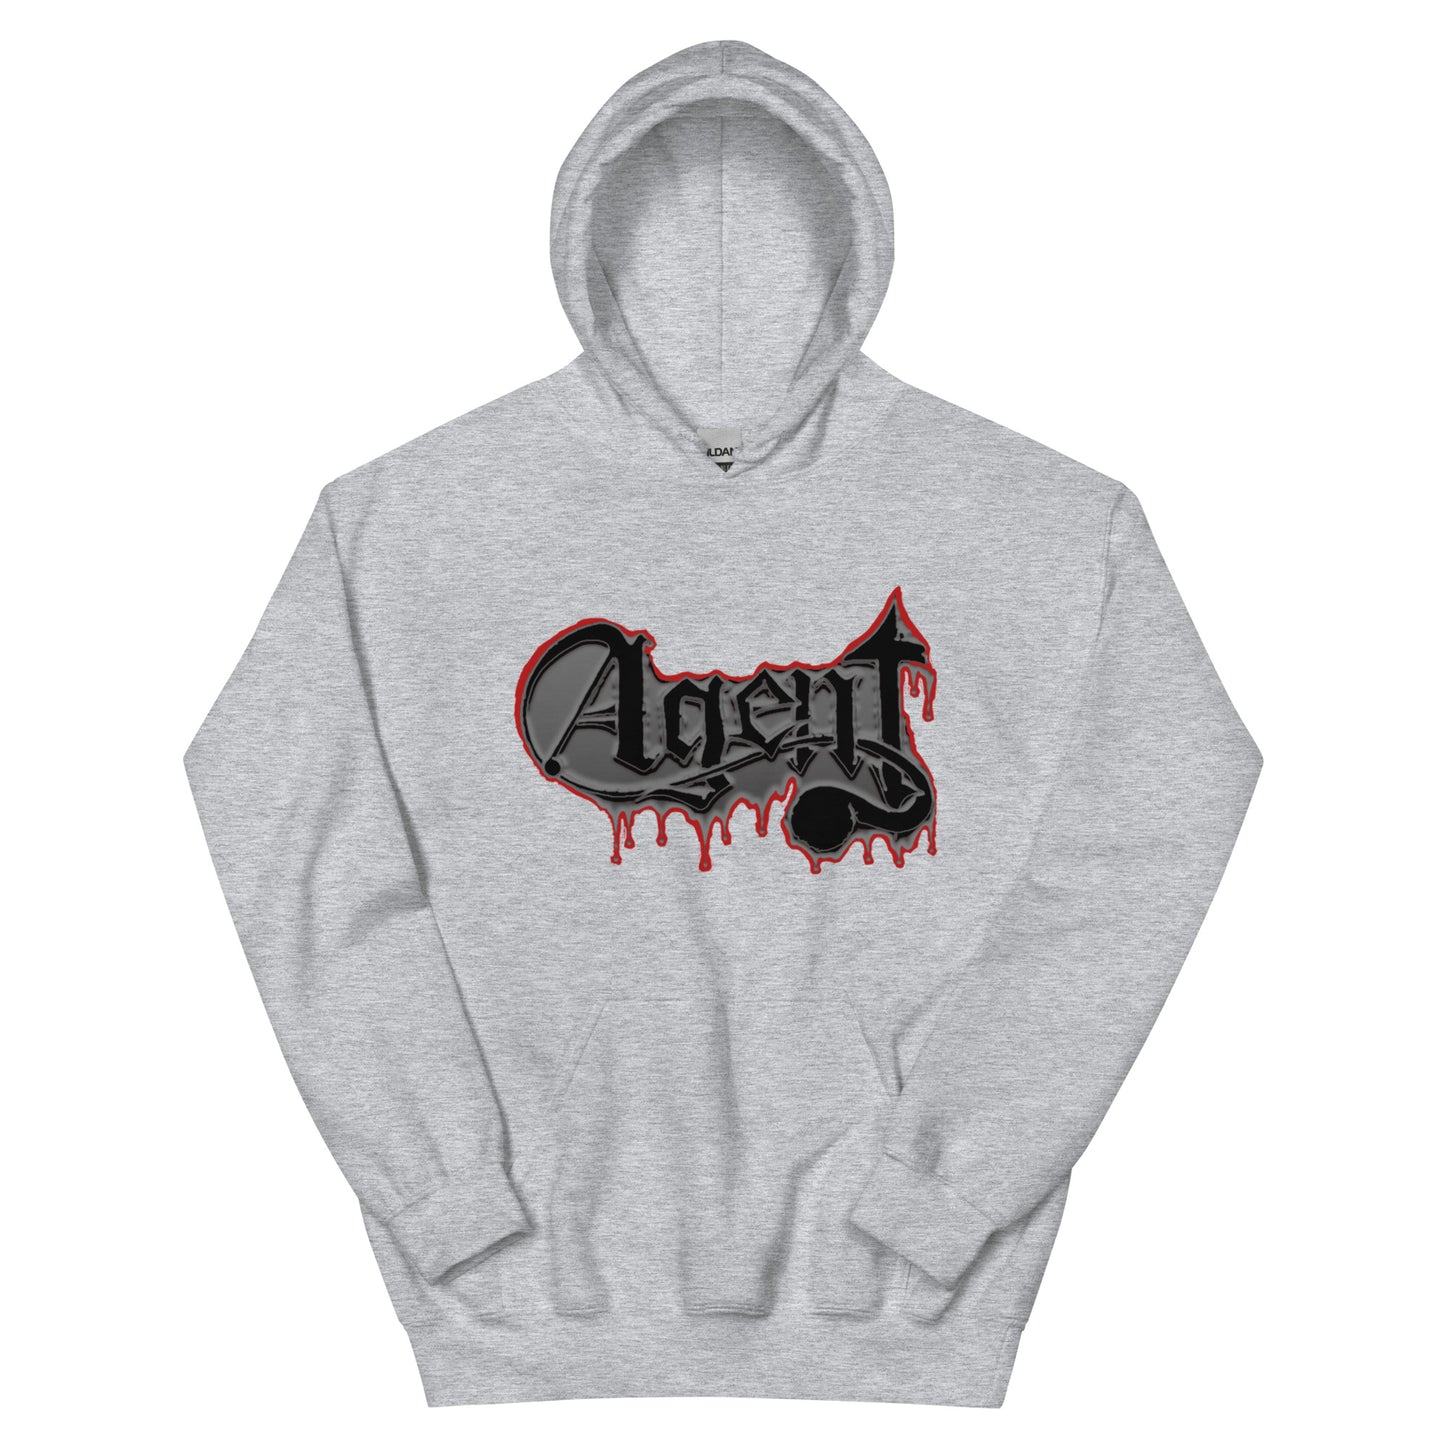 Agent Lungs Hoodie